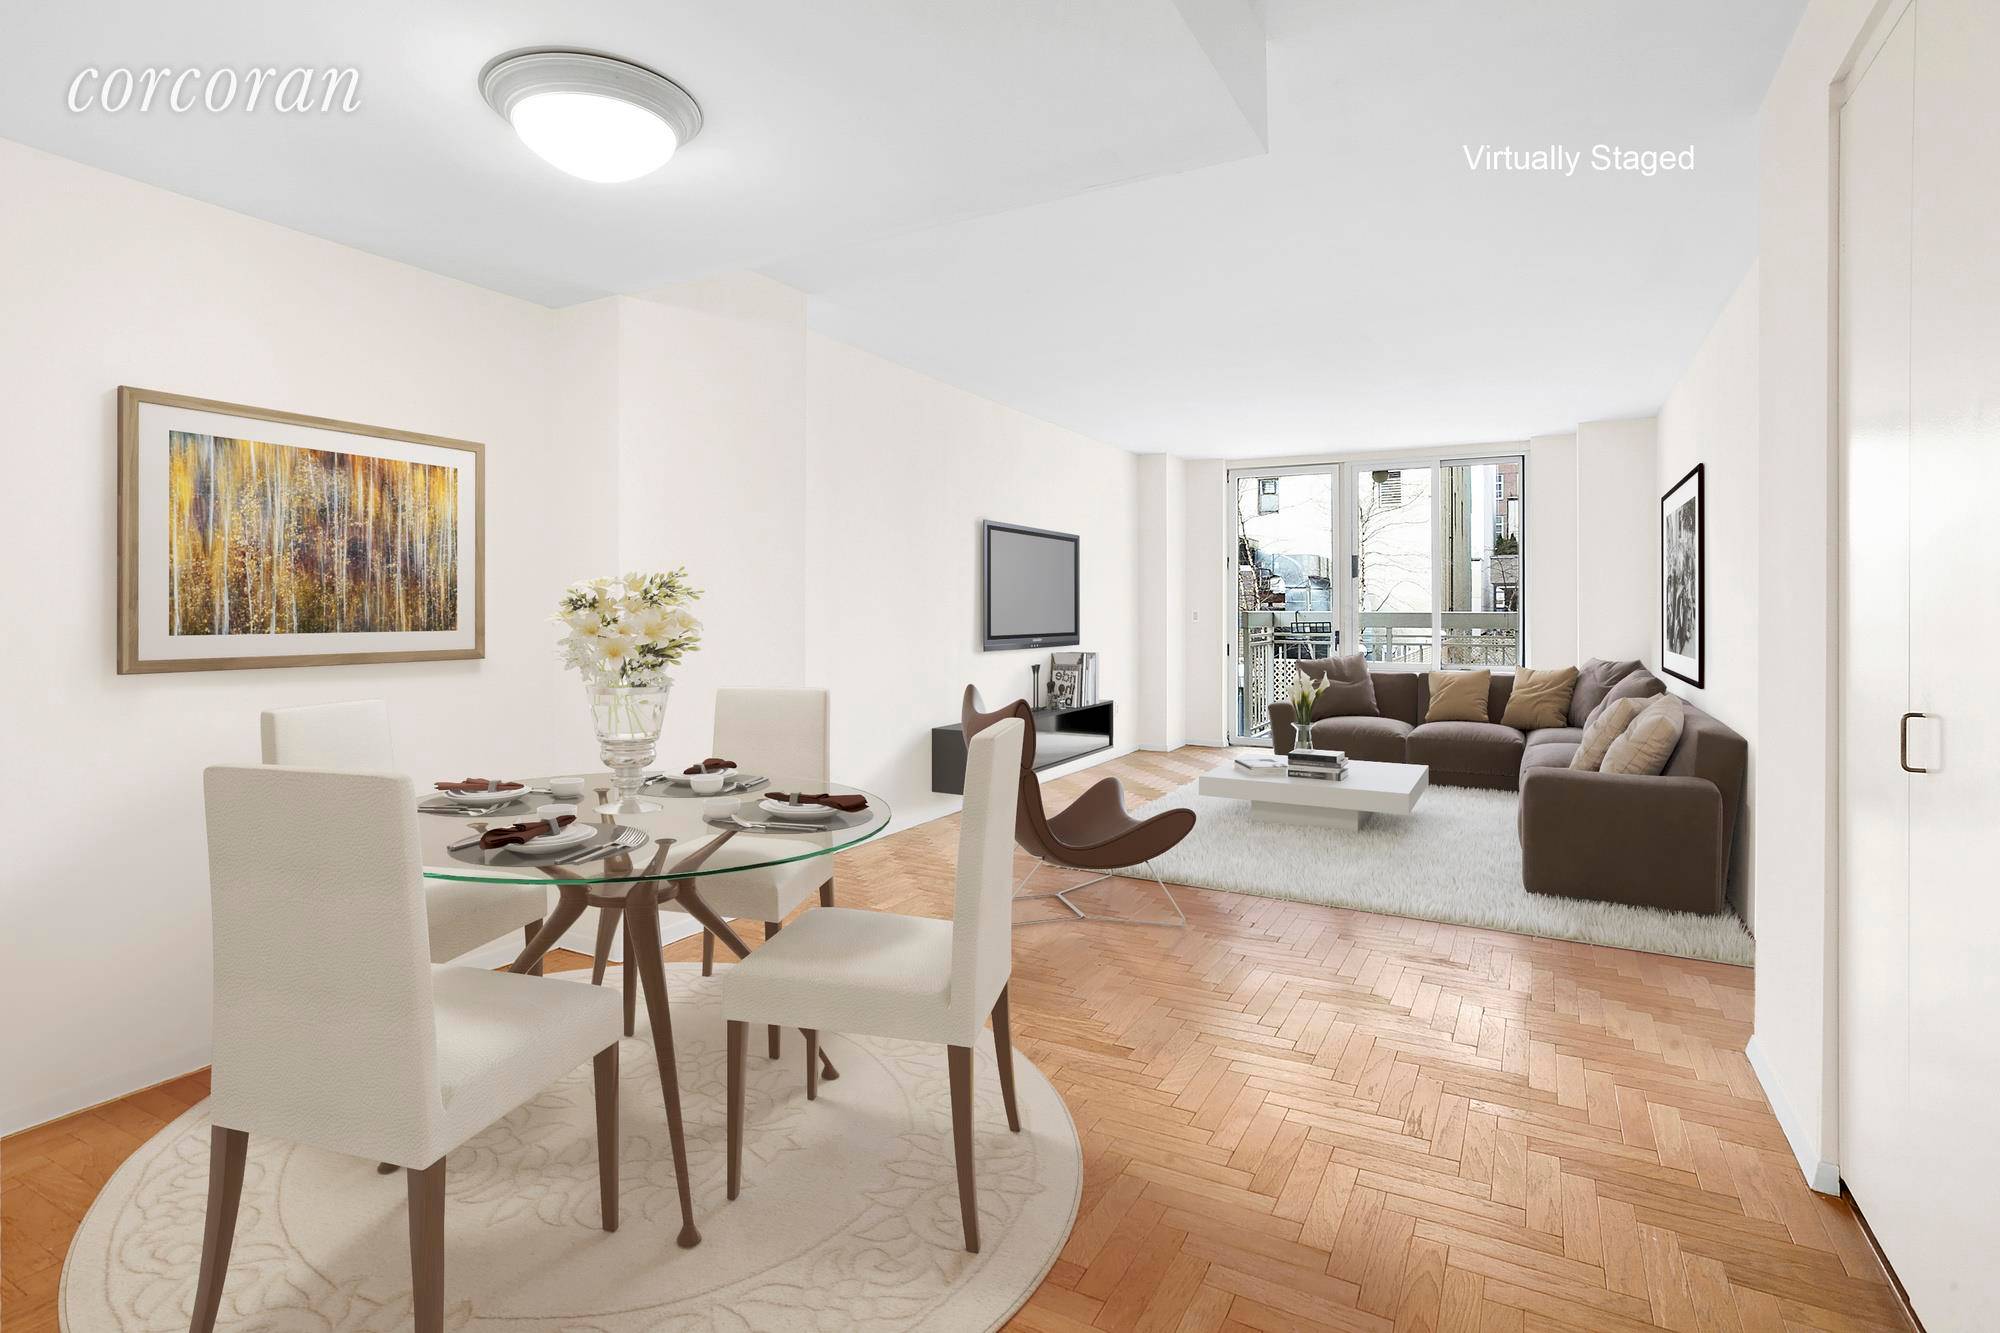 A rare opportunity is now available in the highly coveted Gotham condominium in the heart of Carnegie Hill.